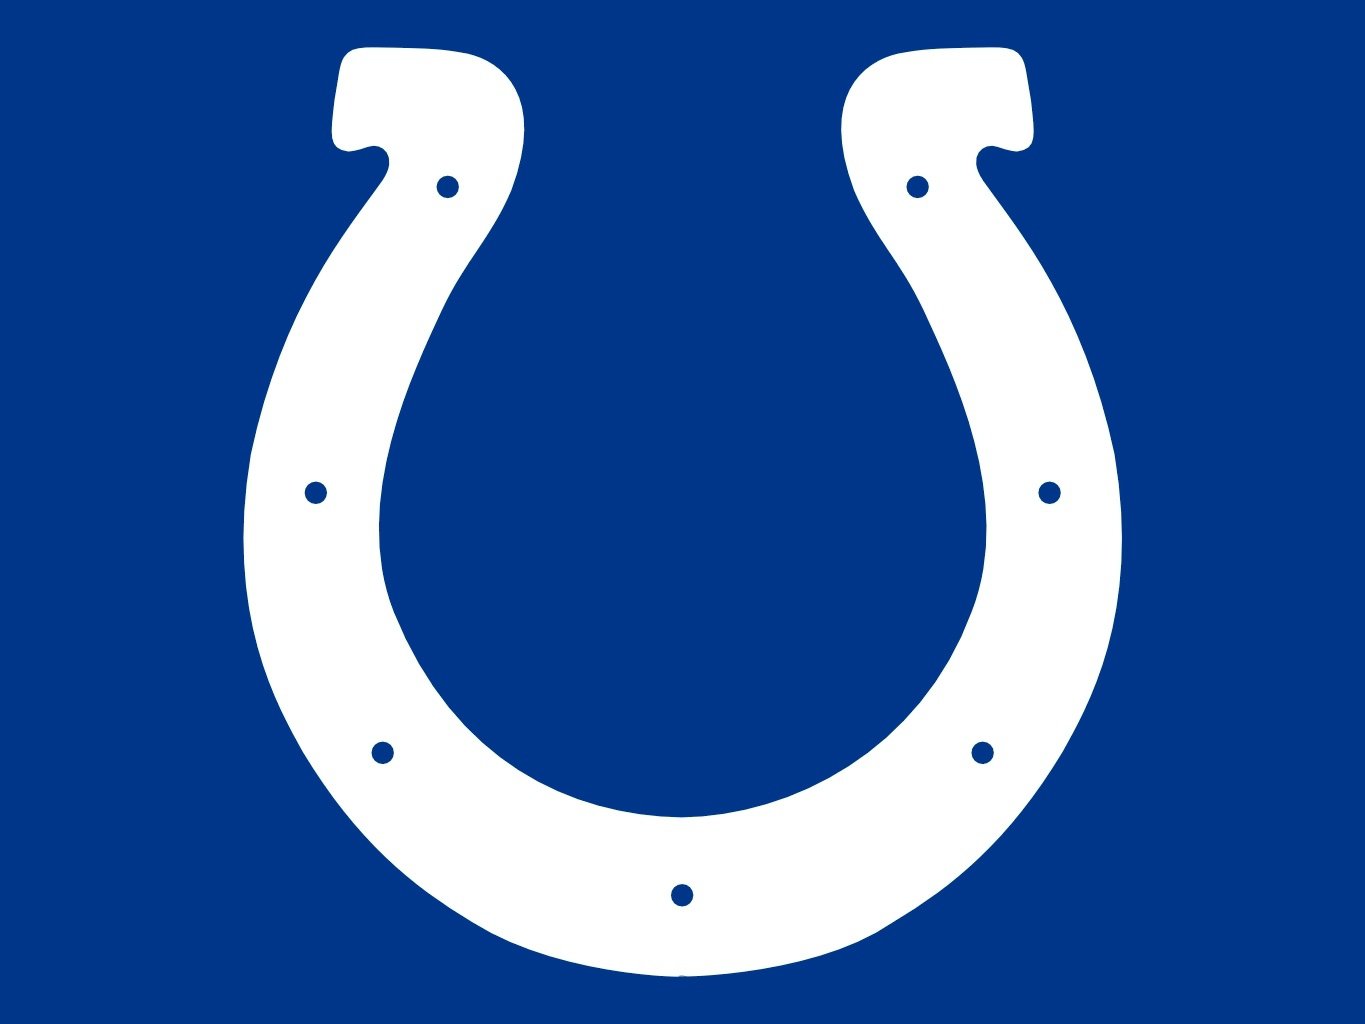 Indianapolis Colts Logo, Colts Symbol Meaning, History and Evolution